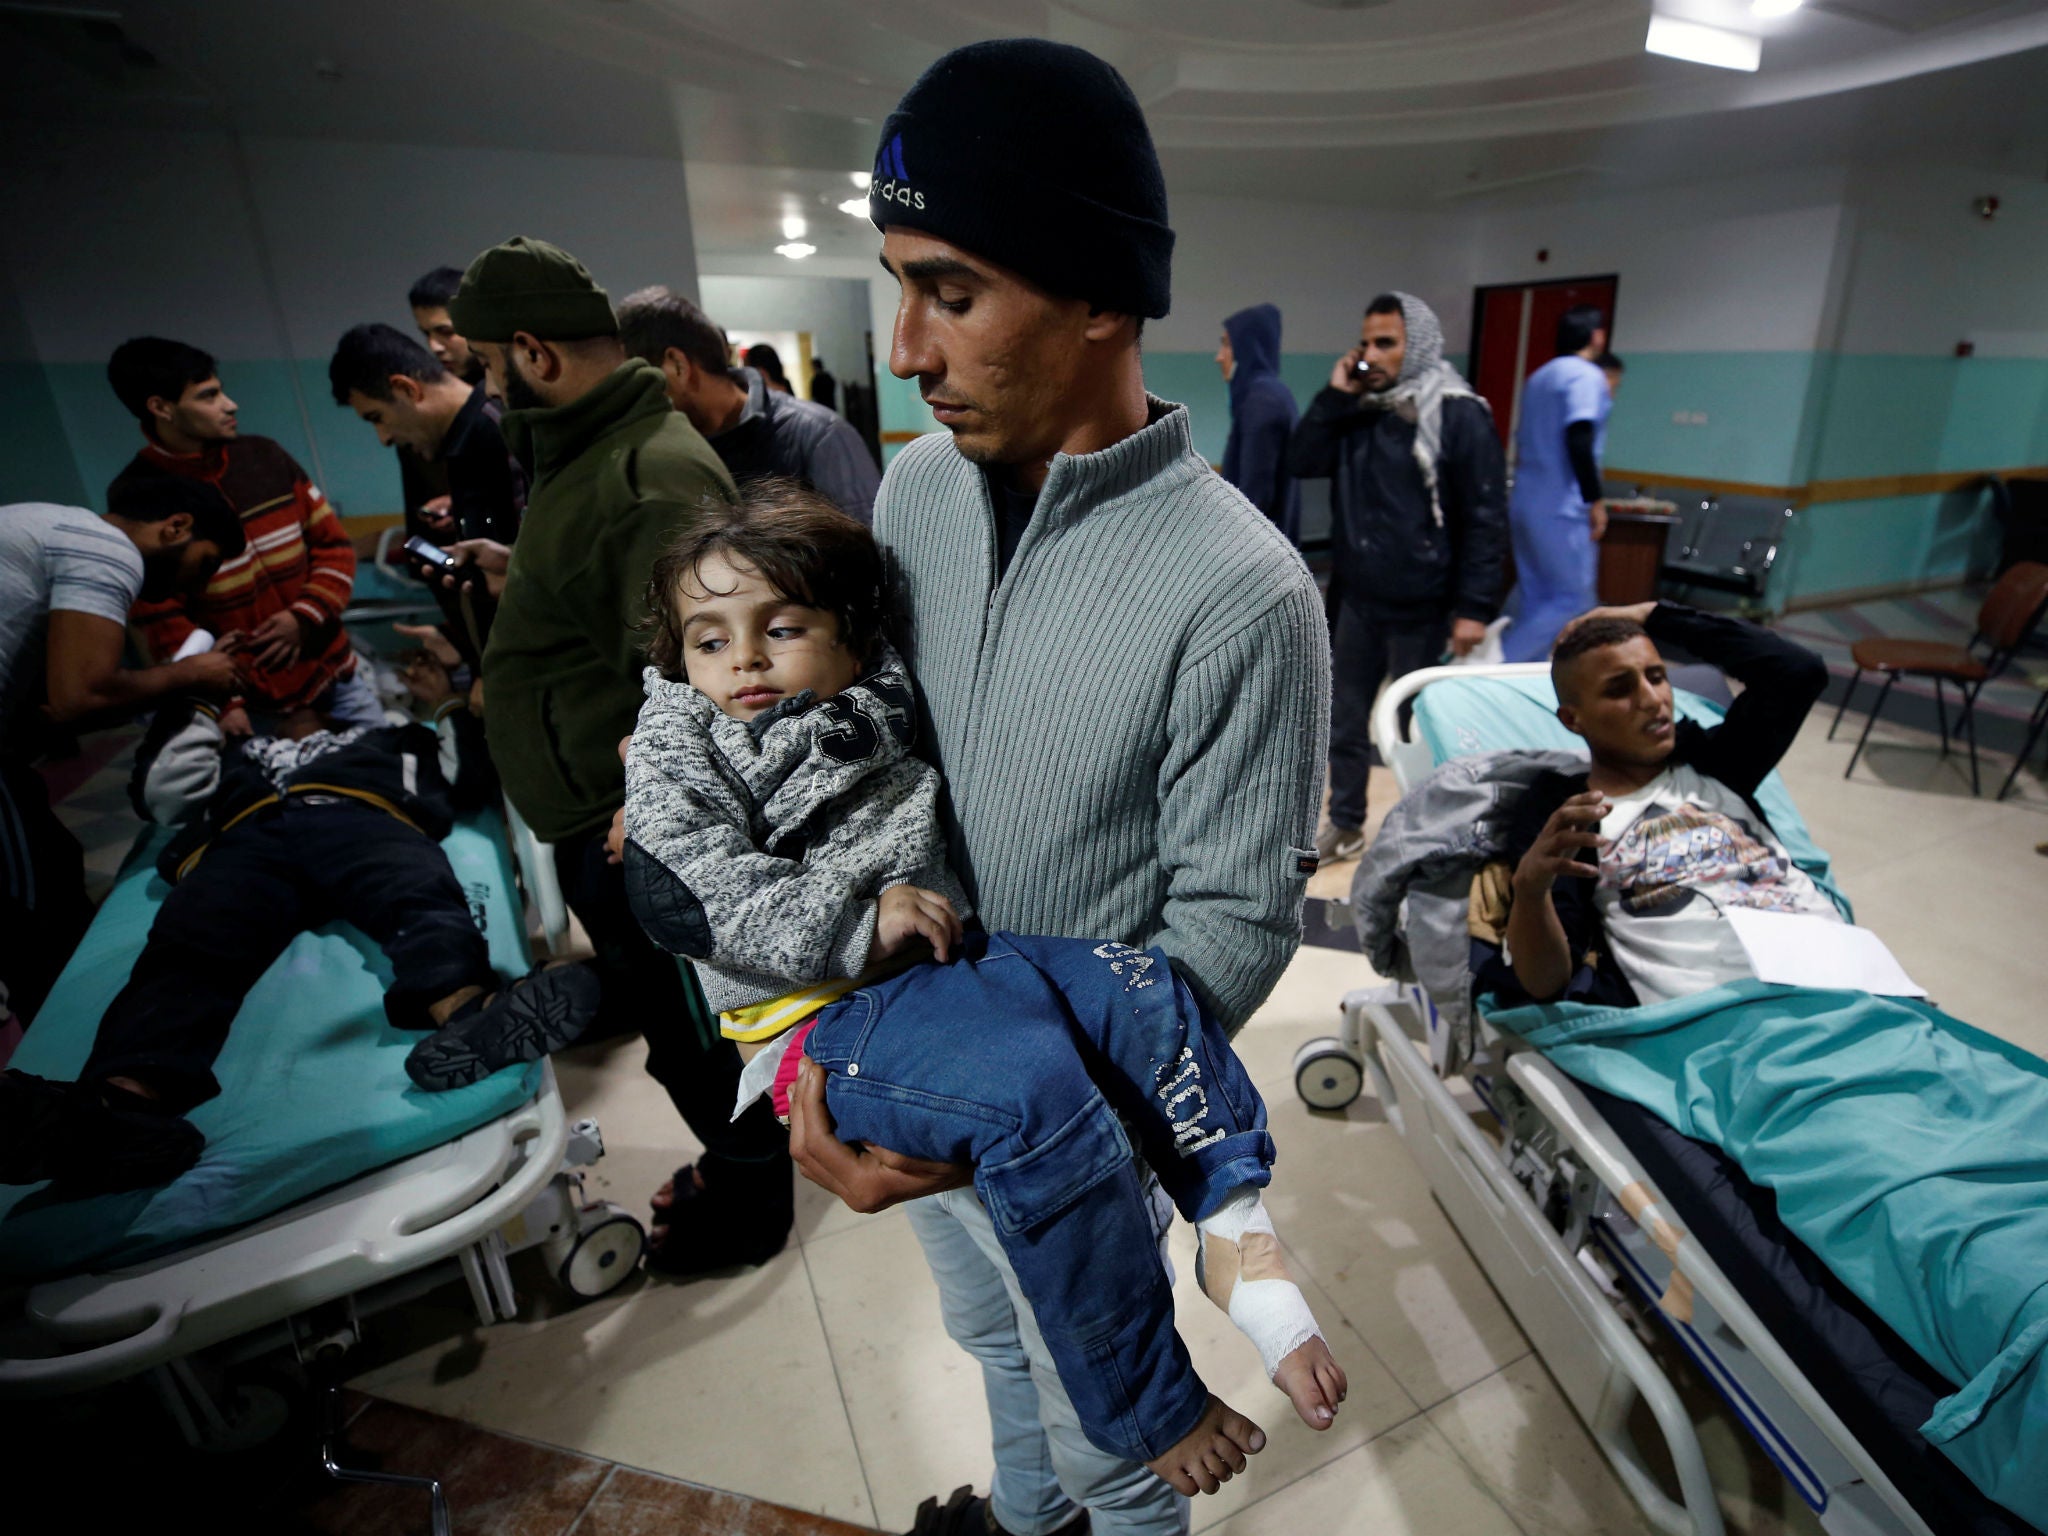 A Palestinian man carries his wounded daughter as she waits to receive treatment at a hospital near to the site of an Israeli air strike